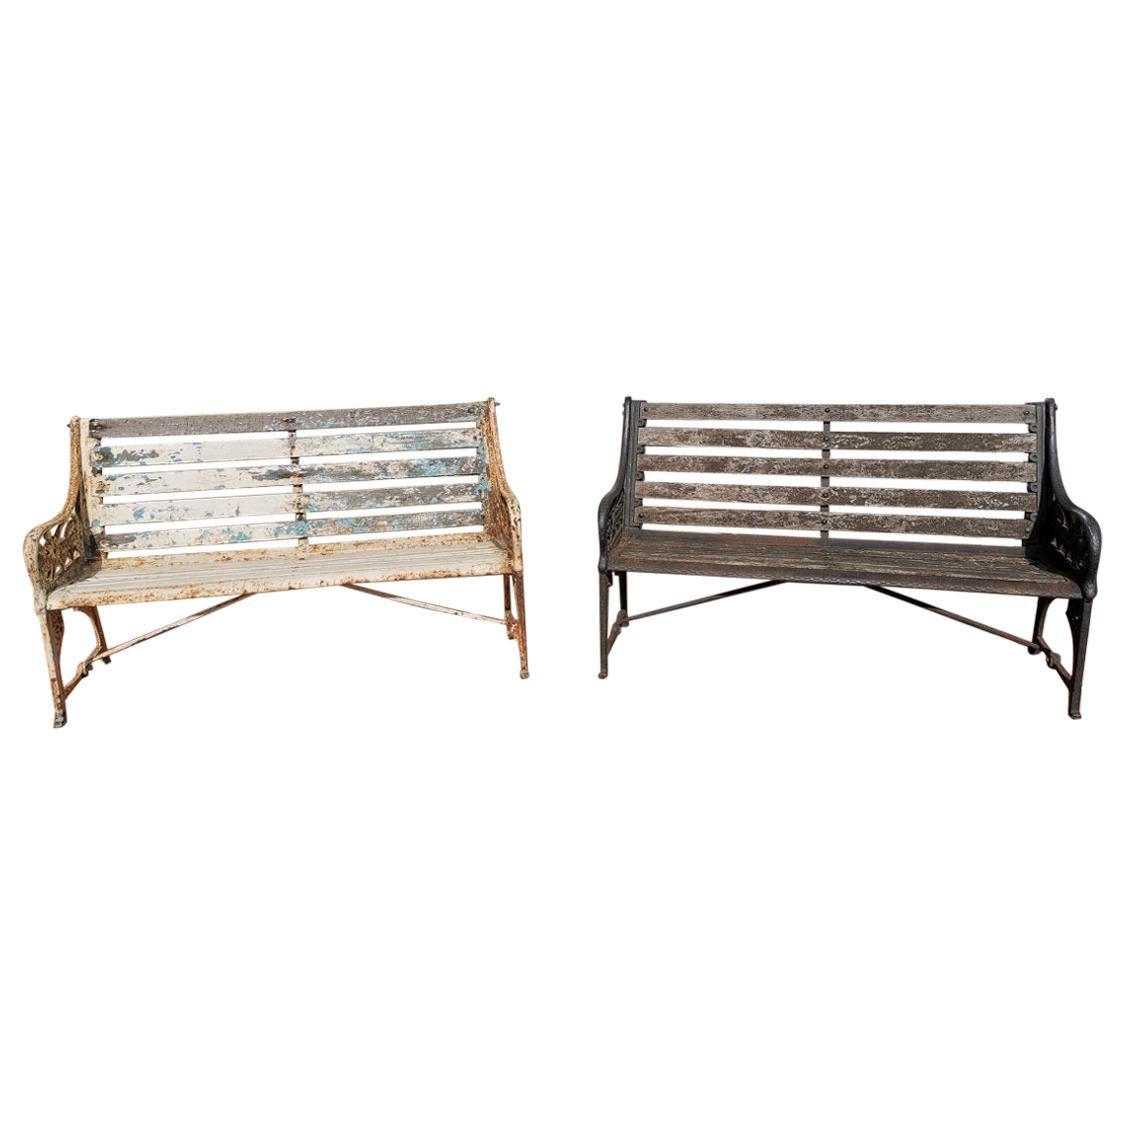 Dr C Dresser for Coalbrookdale Two ‘Medieval’ Pattern Cast Iron Garden Benches